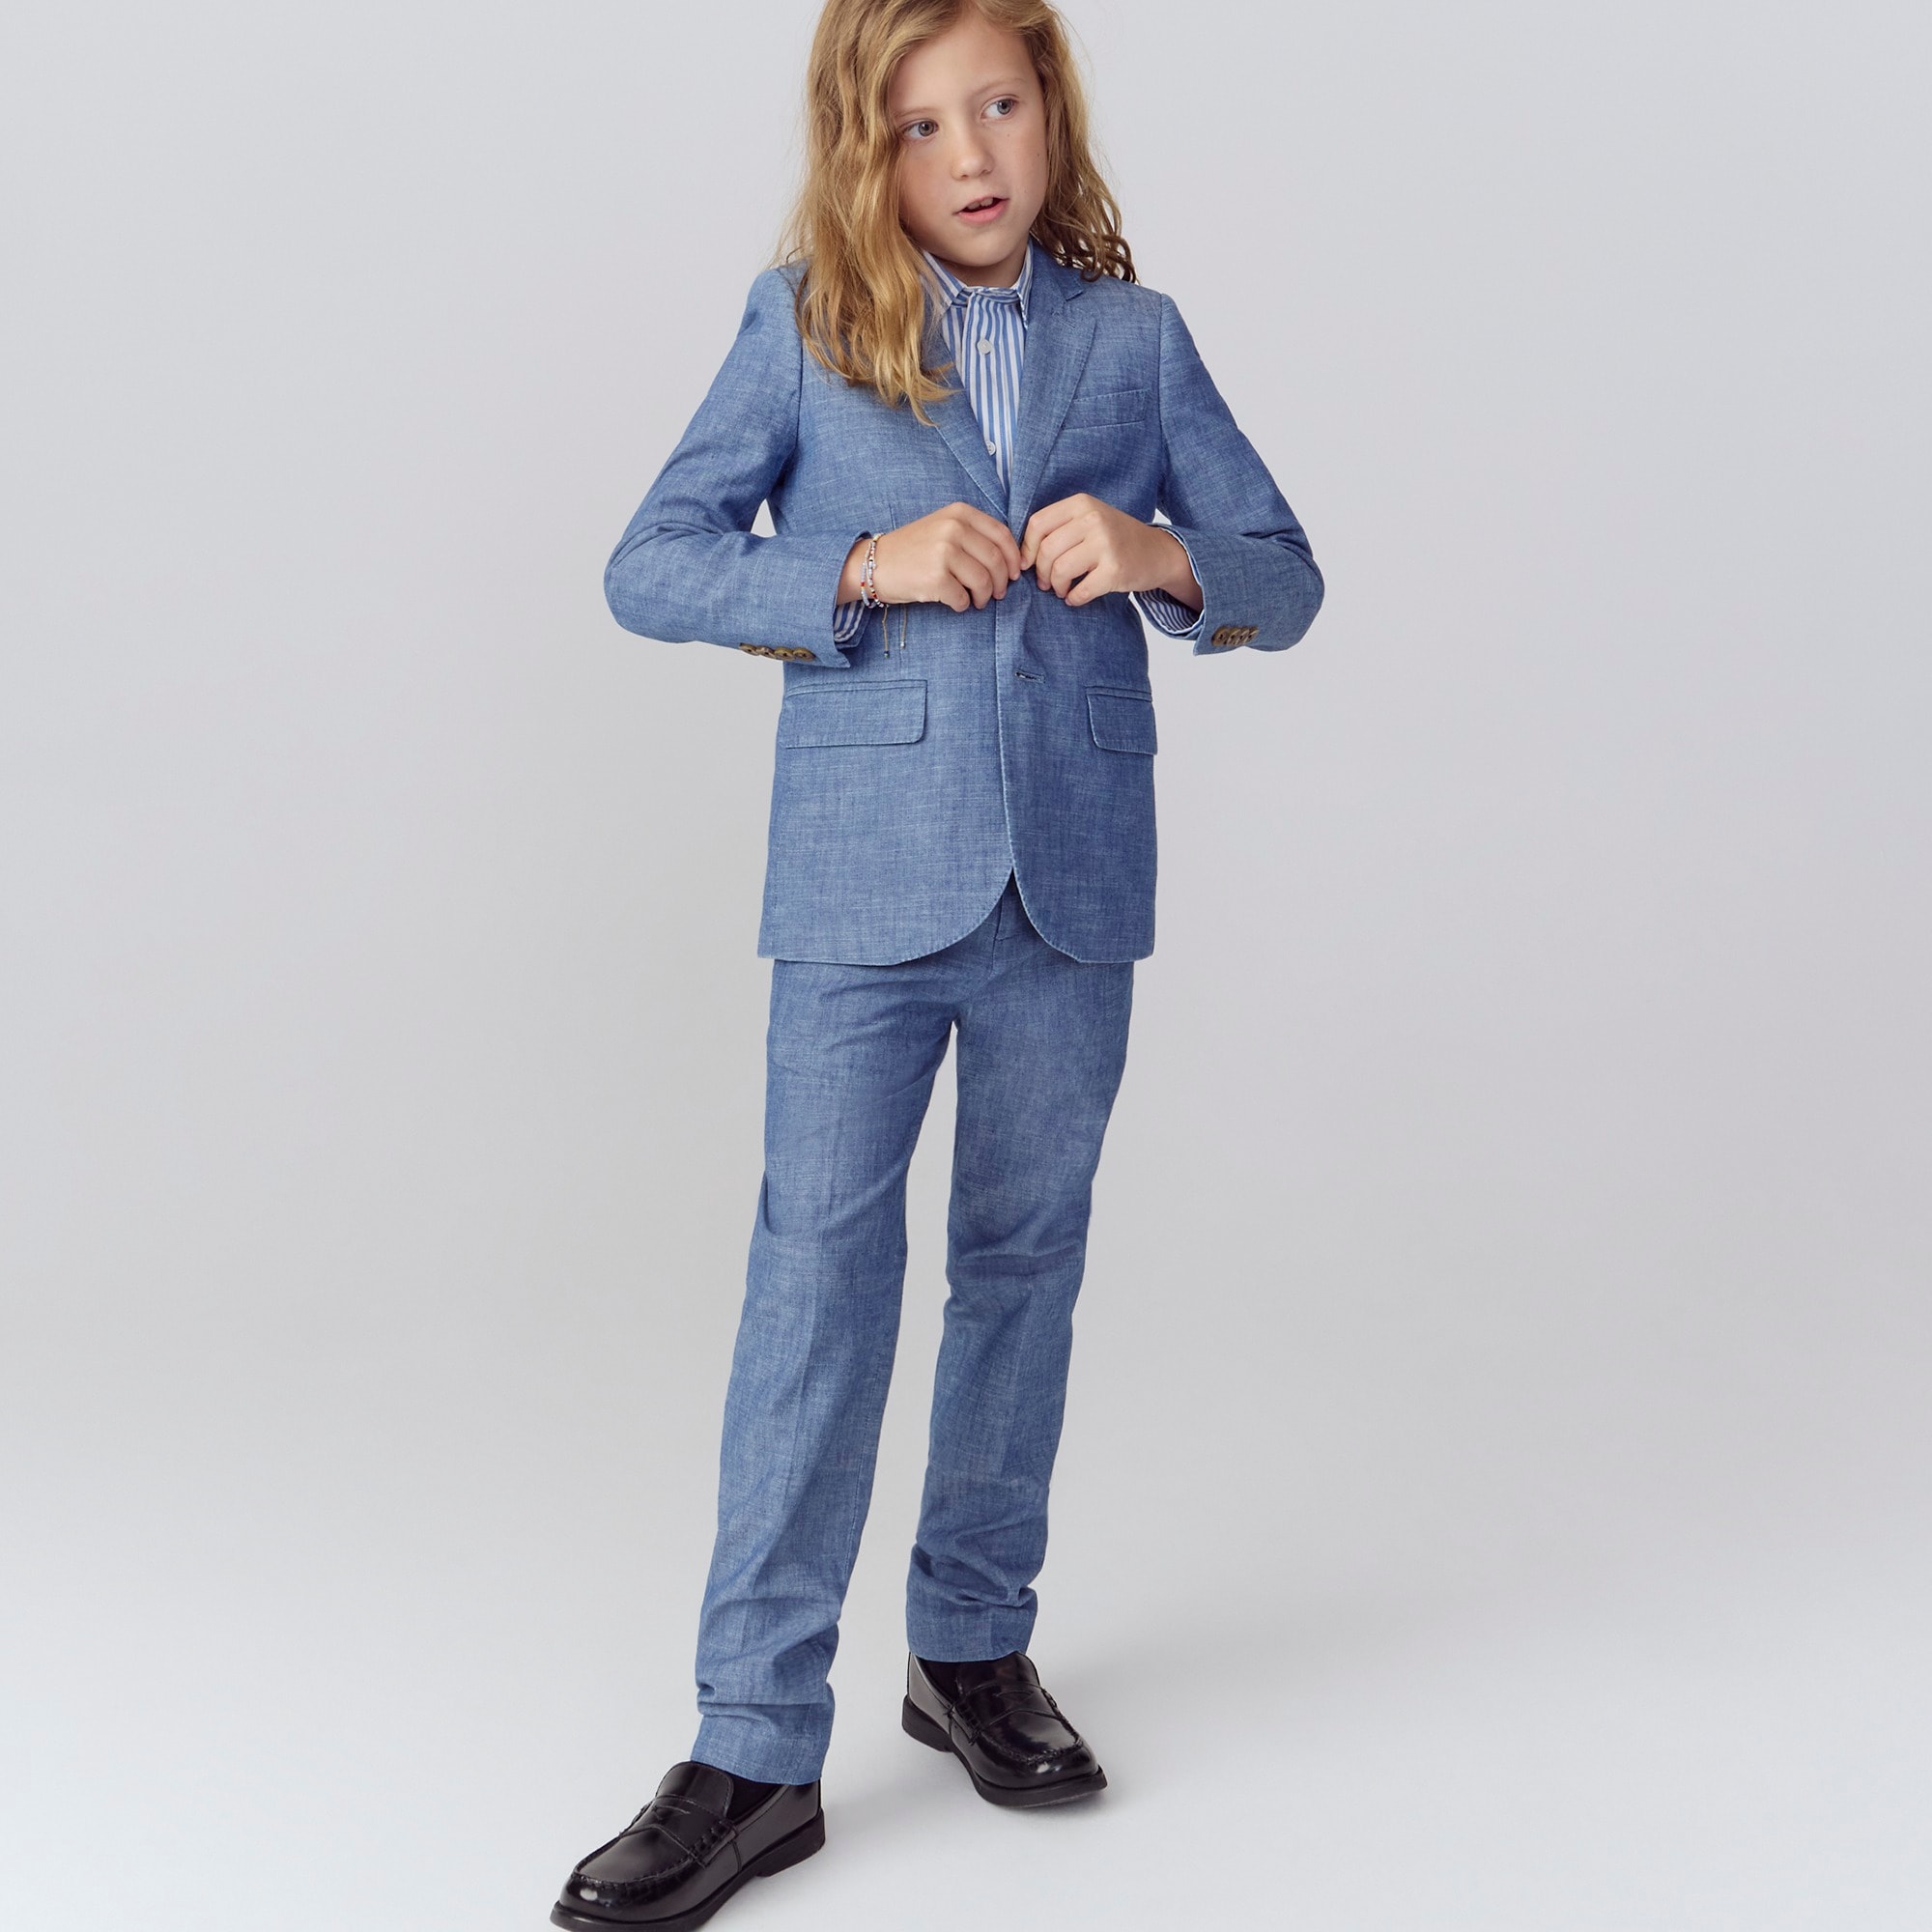  Boys' Ludlow suit pant in chambray